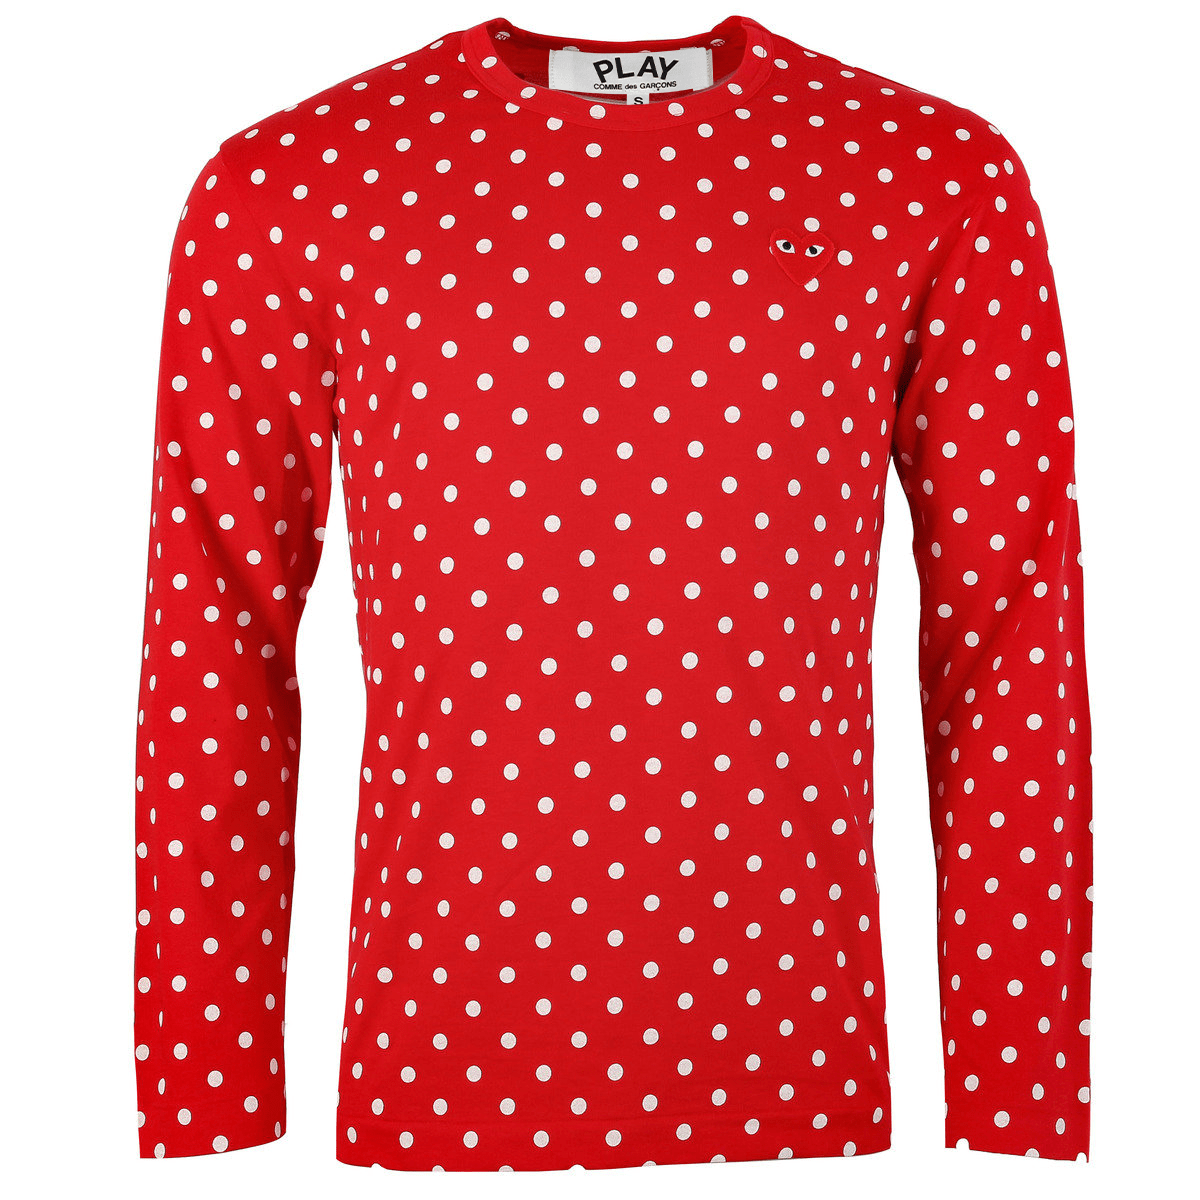 T166 Polka Dot T-shirt Red S Red